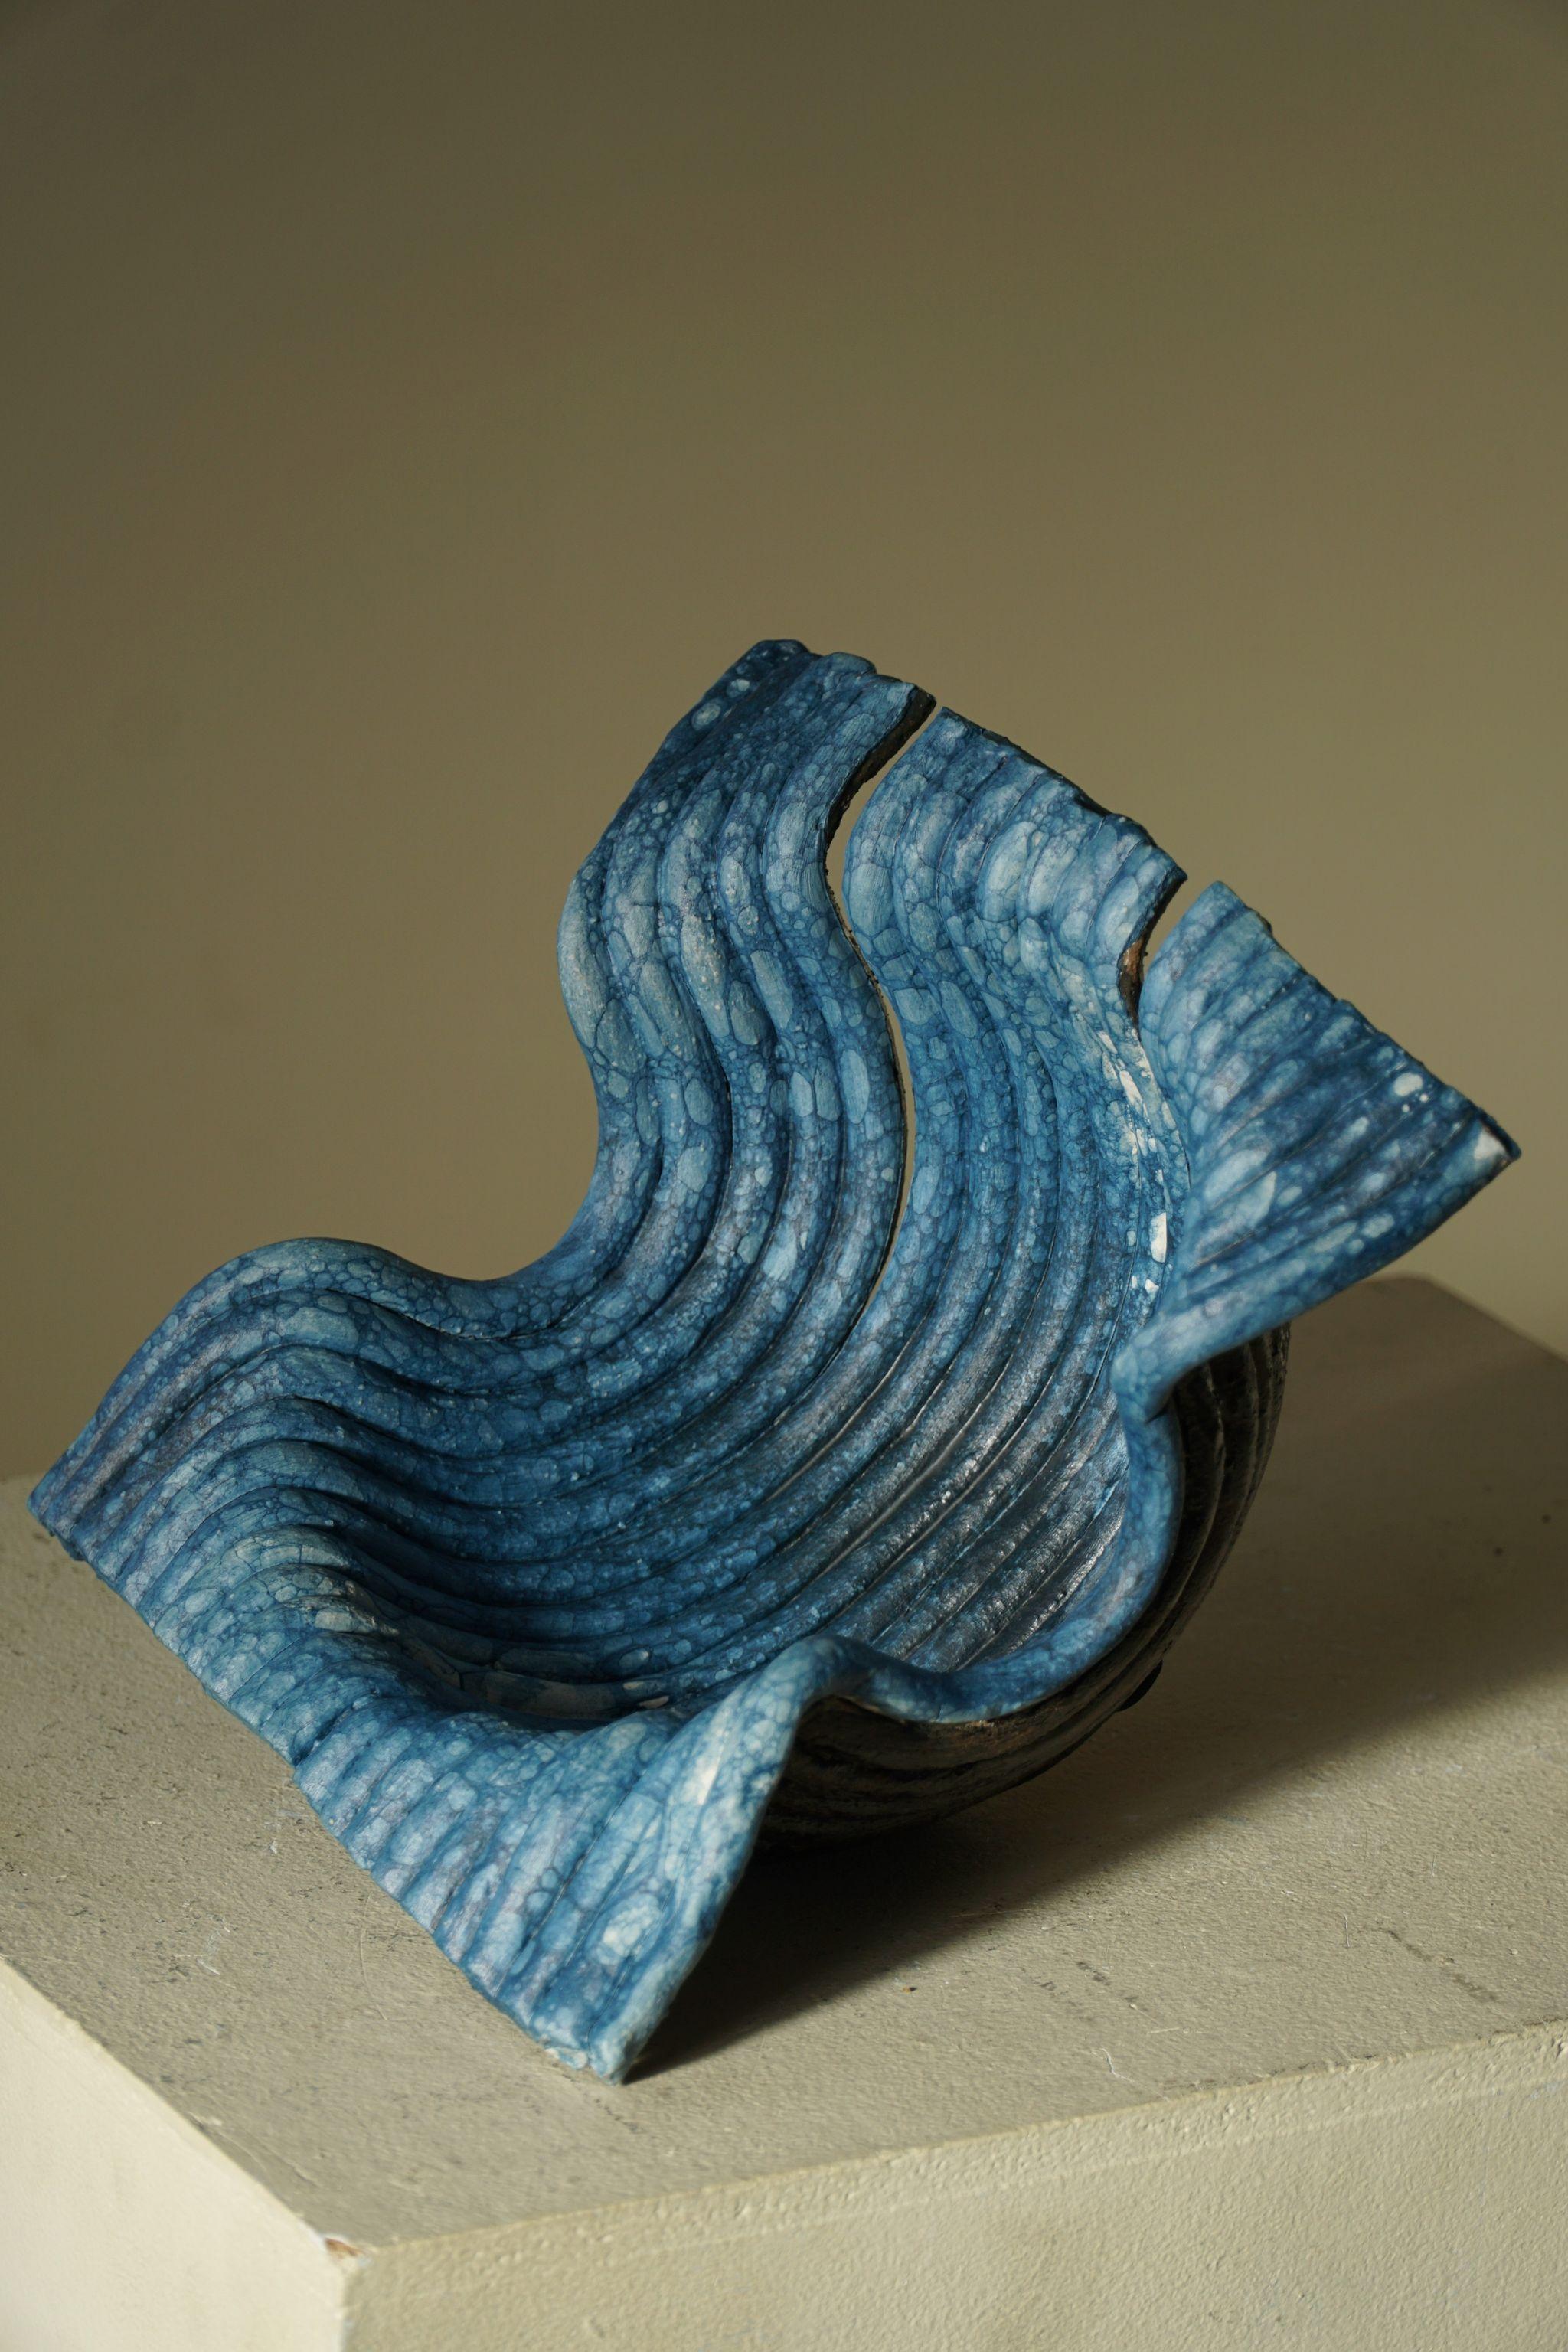 Ceramic bowl with glaze in various blue colors, made by Danish artist Ole Victor, 2021.

Ole Victor is a Danish artist who attended Art Academy between 1975 and 1980. He creates artworks and ceramics ever since. Hes been exhibited in Galerie 26 on